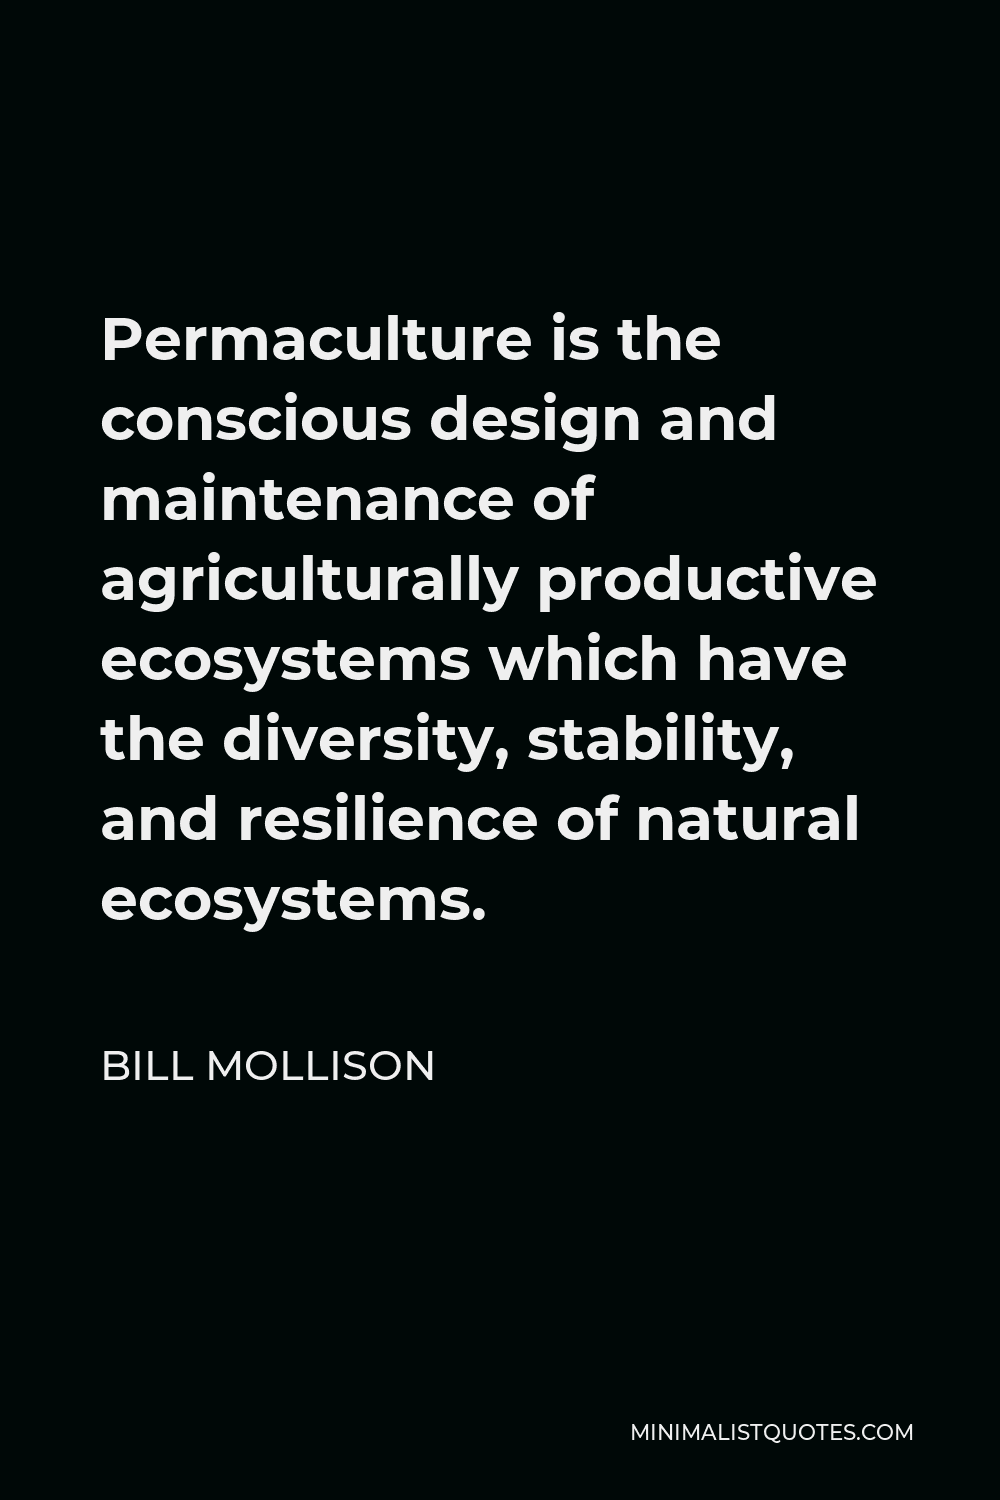 Bill Mollison Quote - Permaculture is the conscious design and maintenance of agriculturally productive ecosystems which have the diversity, stability, and resilience of natural ecosystems.